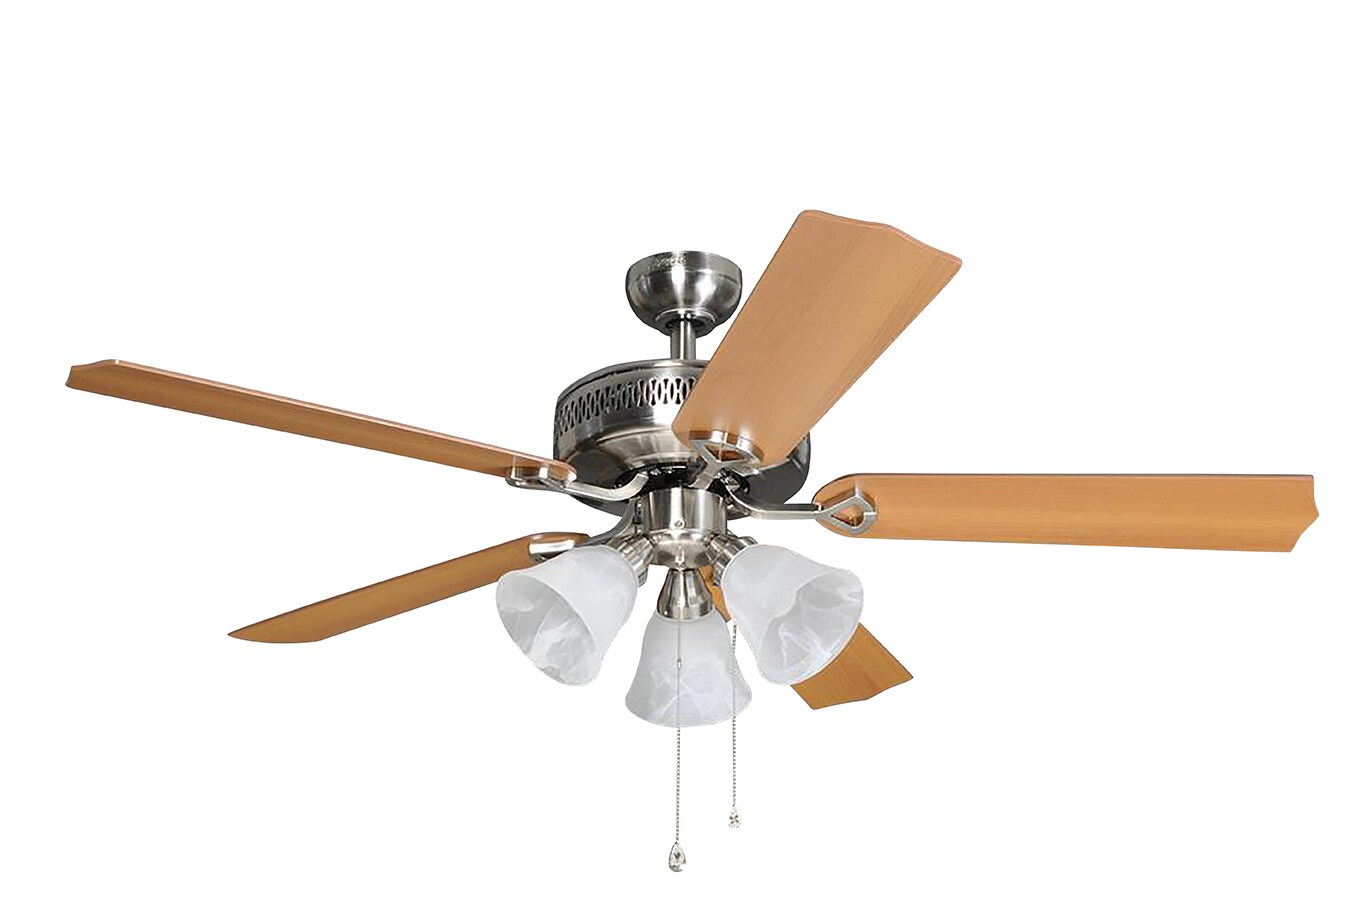 HARBOR BREEZE Barnstaple Bay ceiling fan Frosted glass shade 